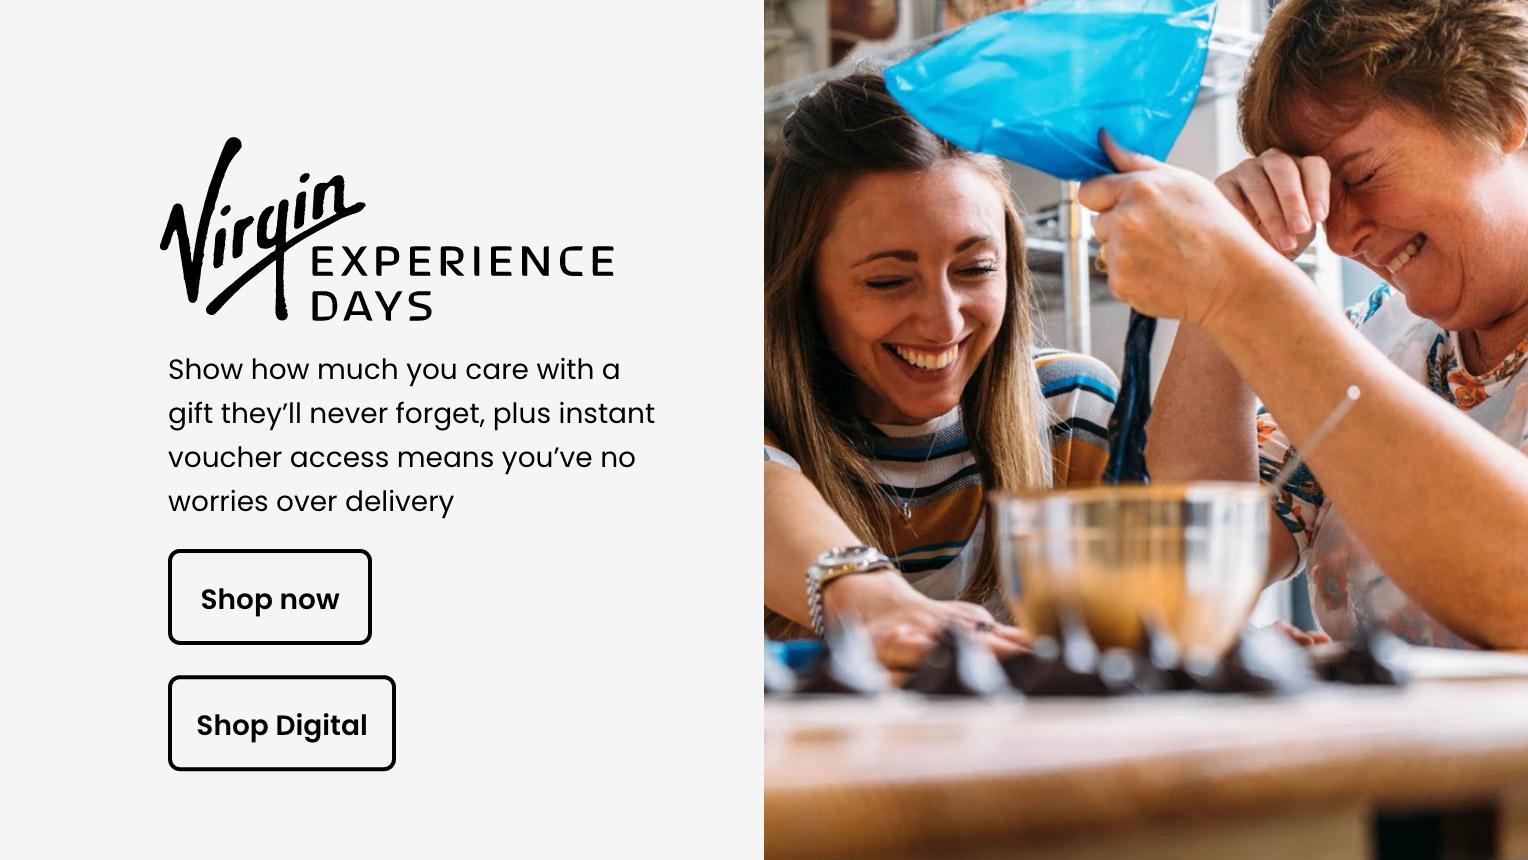 Virgin experience days. Treat someone to a gift they'll never forget with instant voucher access so you've no worries over delivery. Shop now.